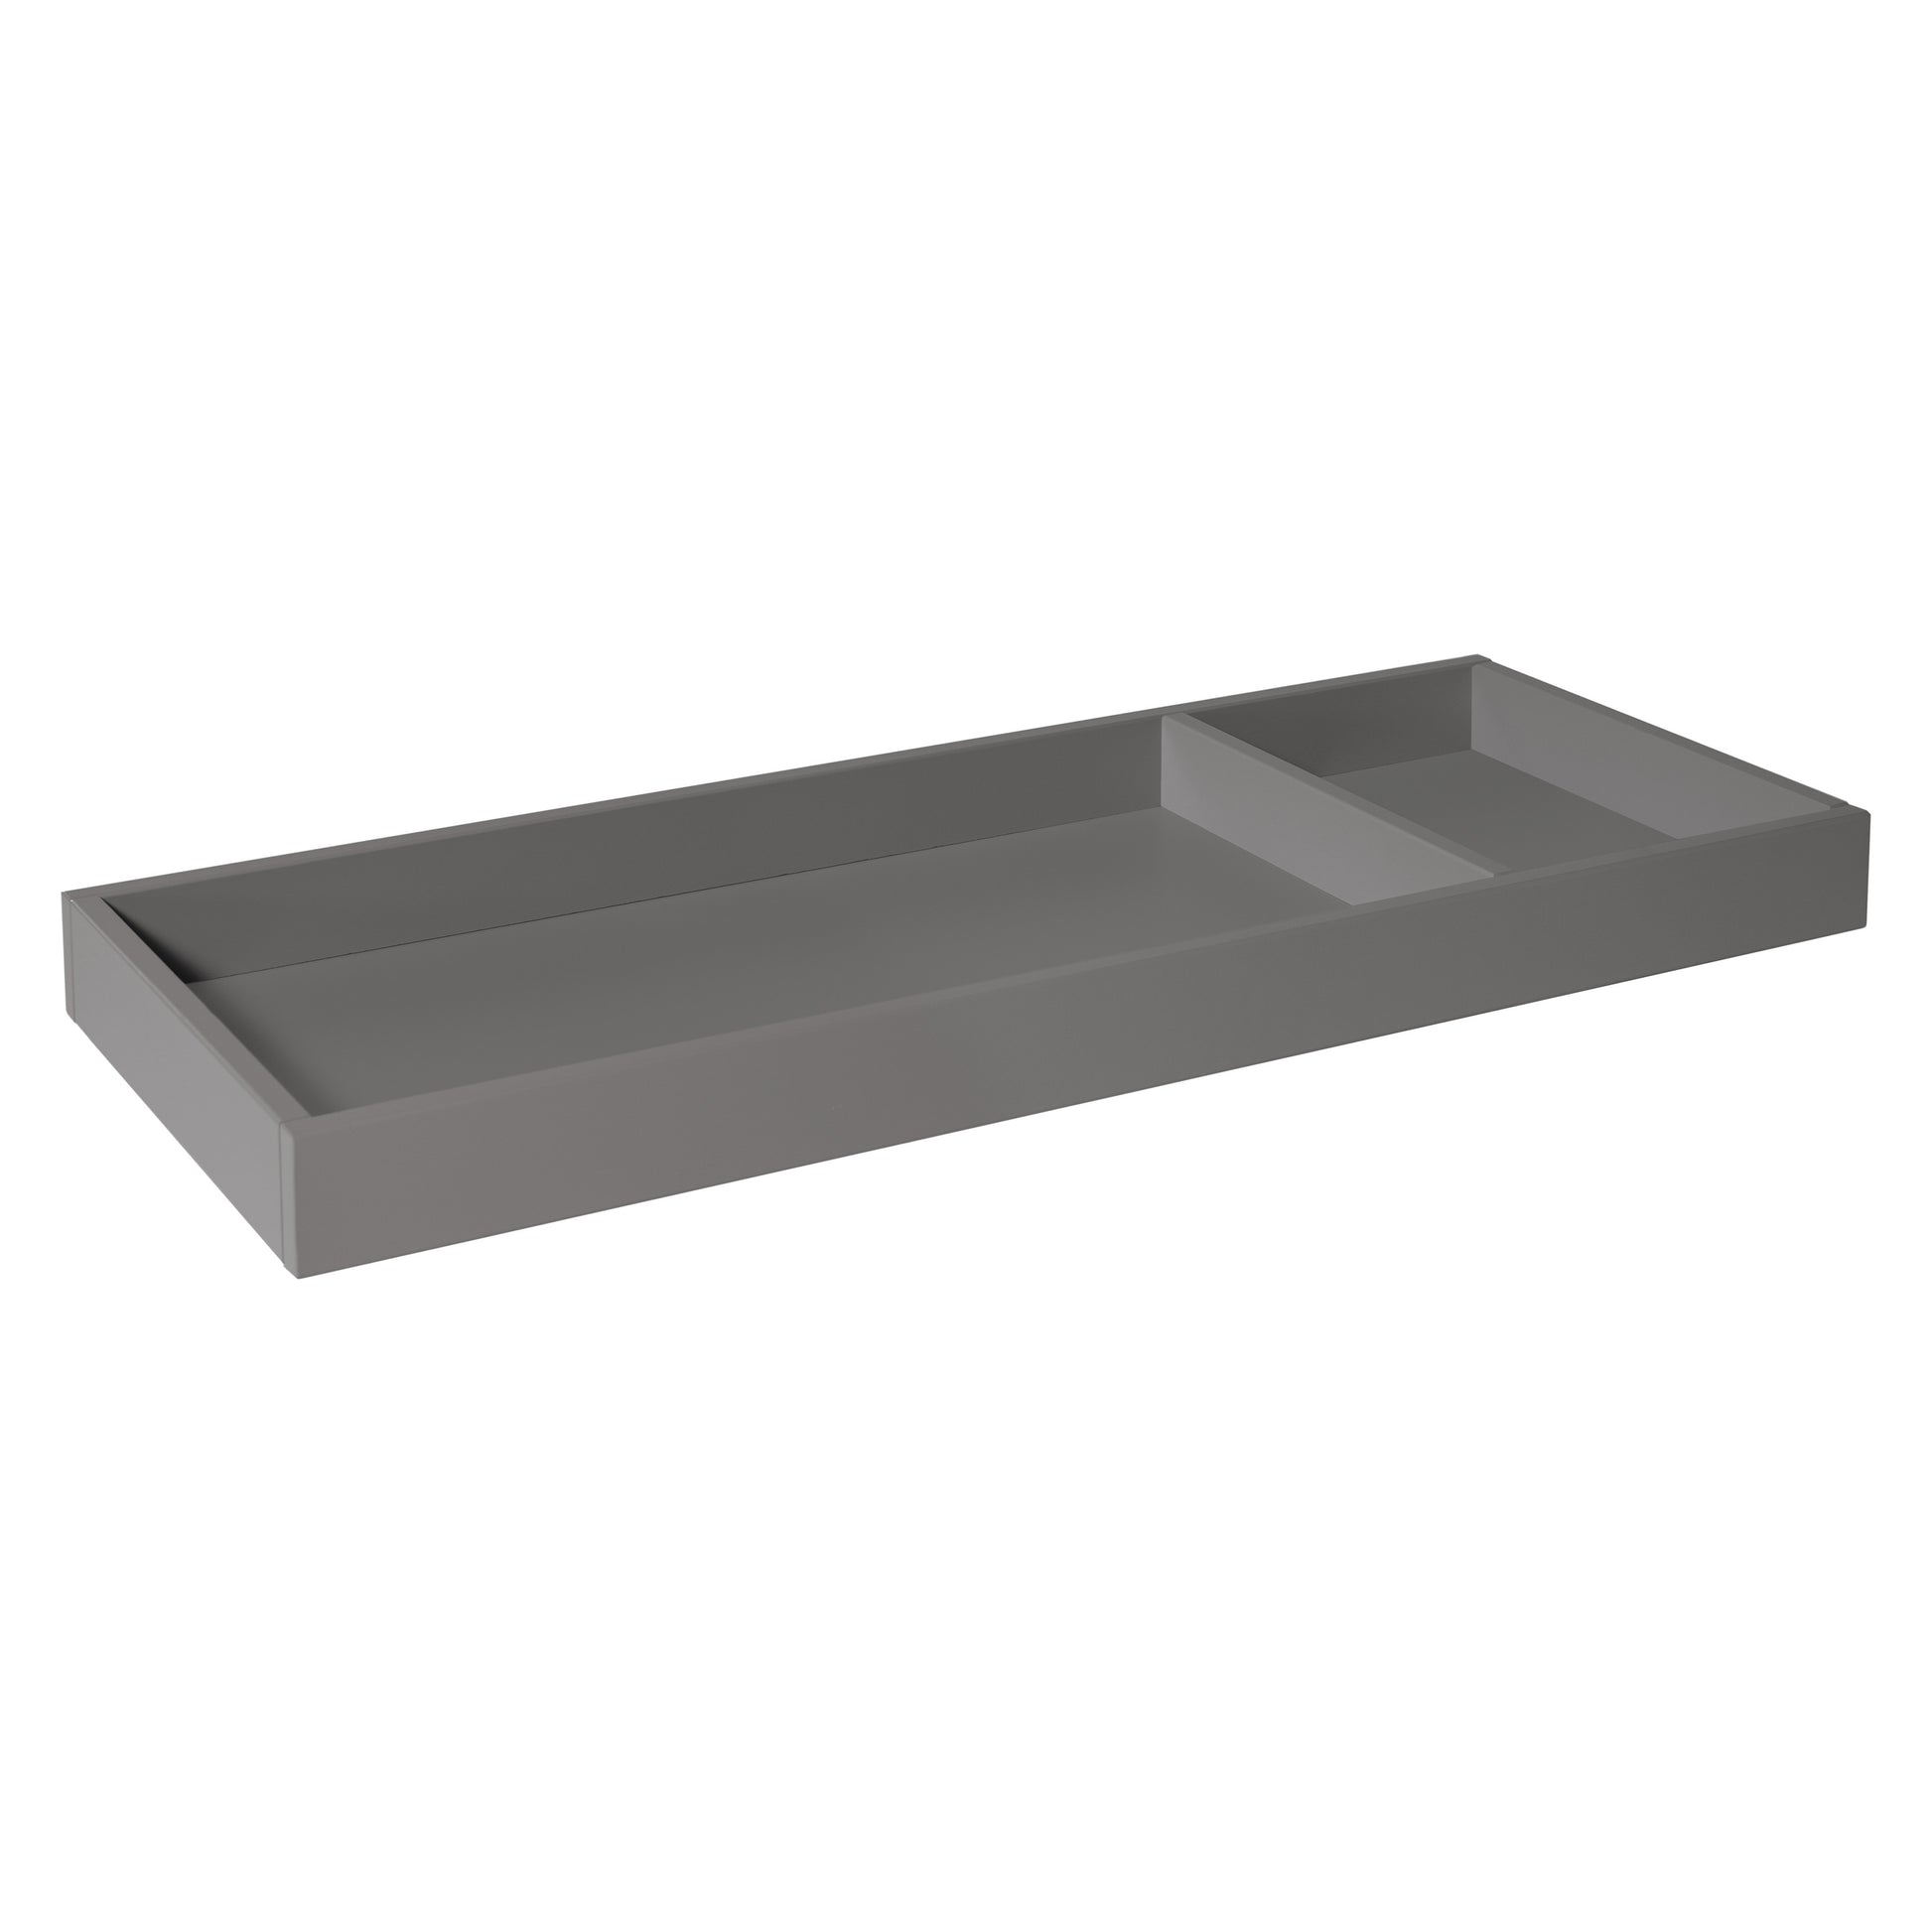 M0619SL,Universal Wide Removable Changing Tray in Slate